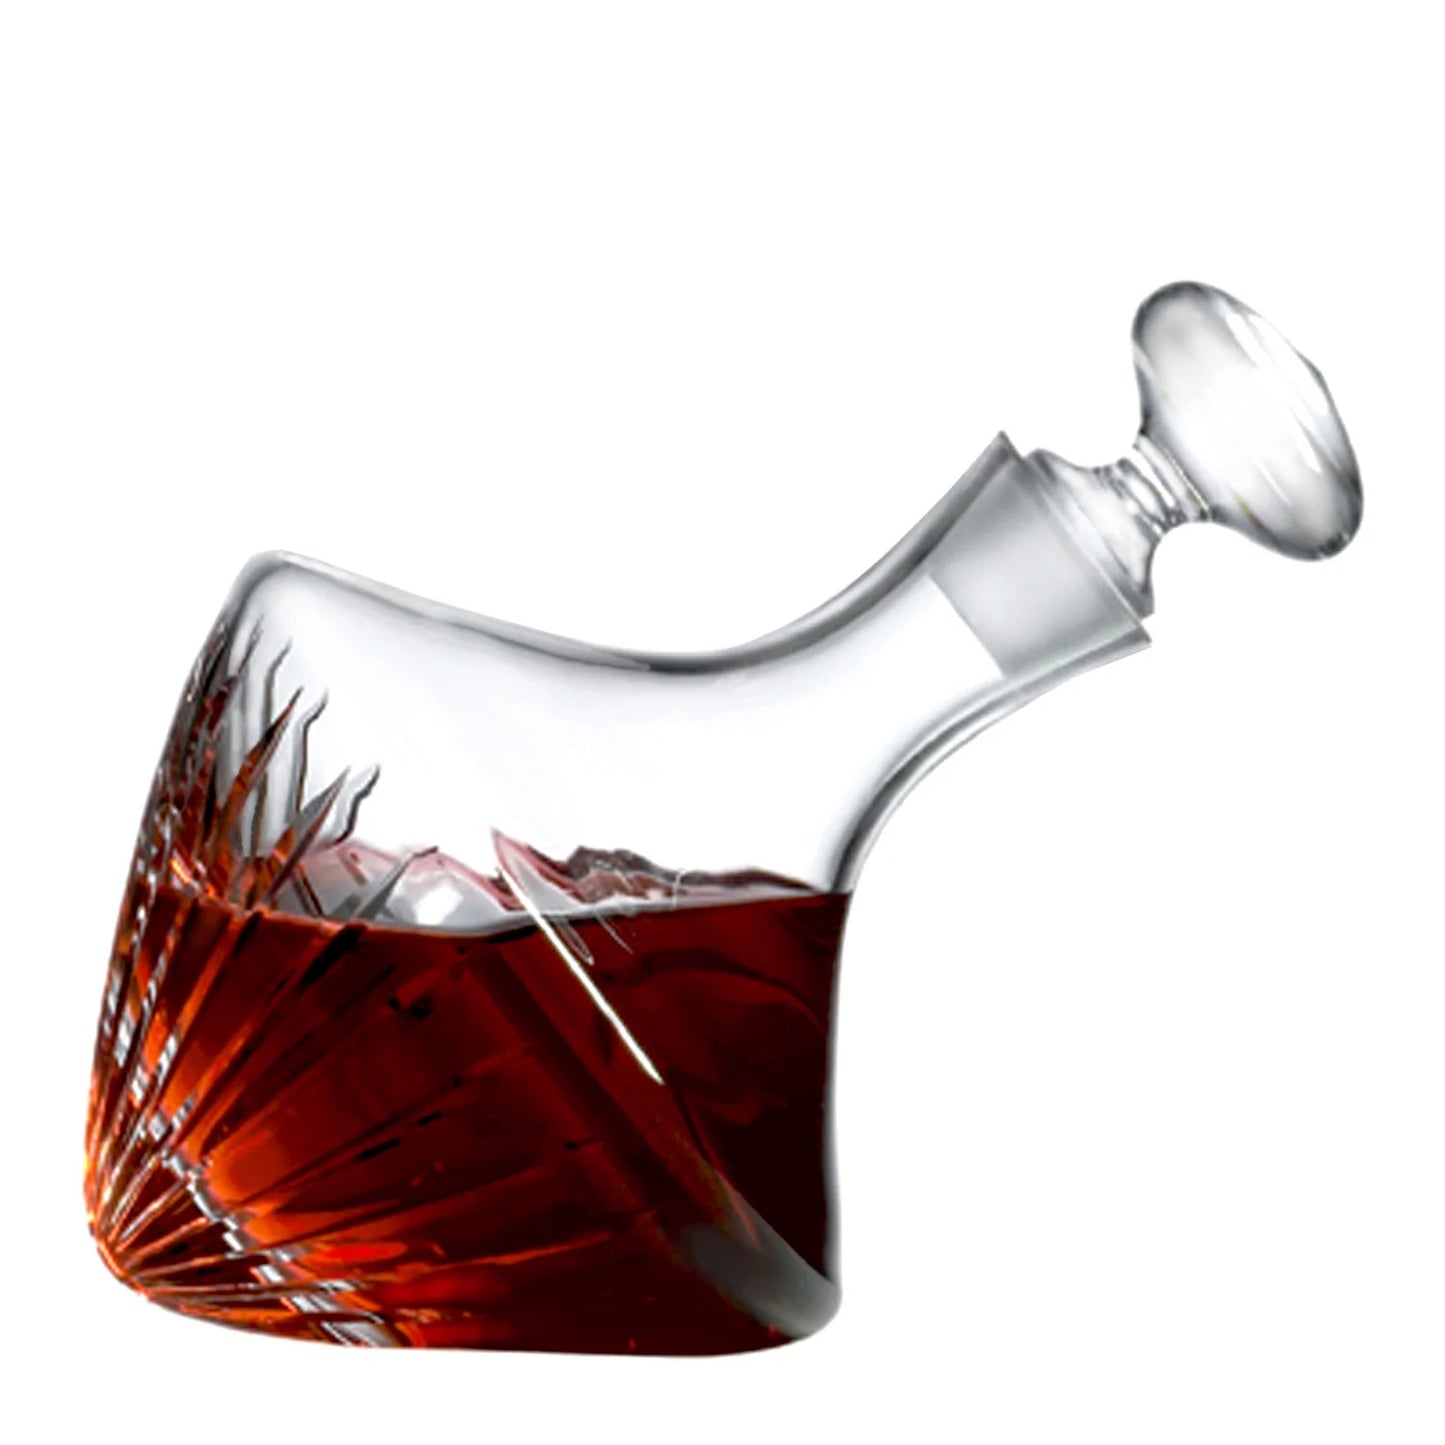 Ravenscroft Crystal Beveled Orbital Single Decanter with Free Luxury Satin Decanter and Stopper Bags W3505-0750